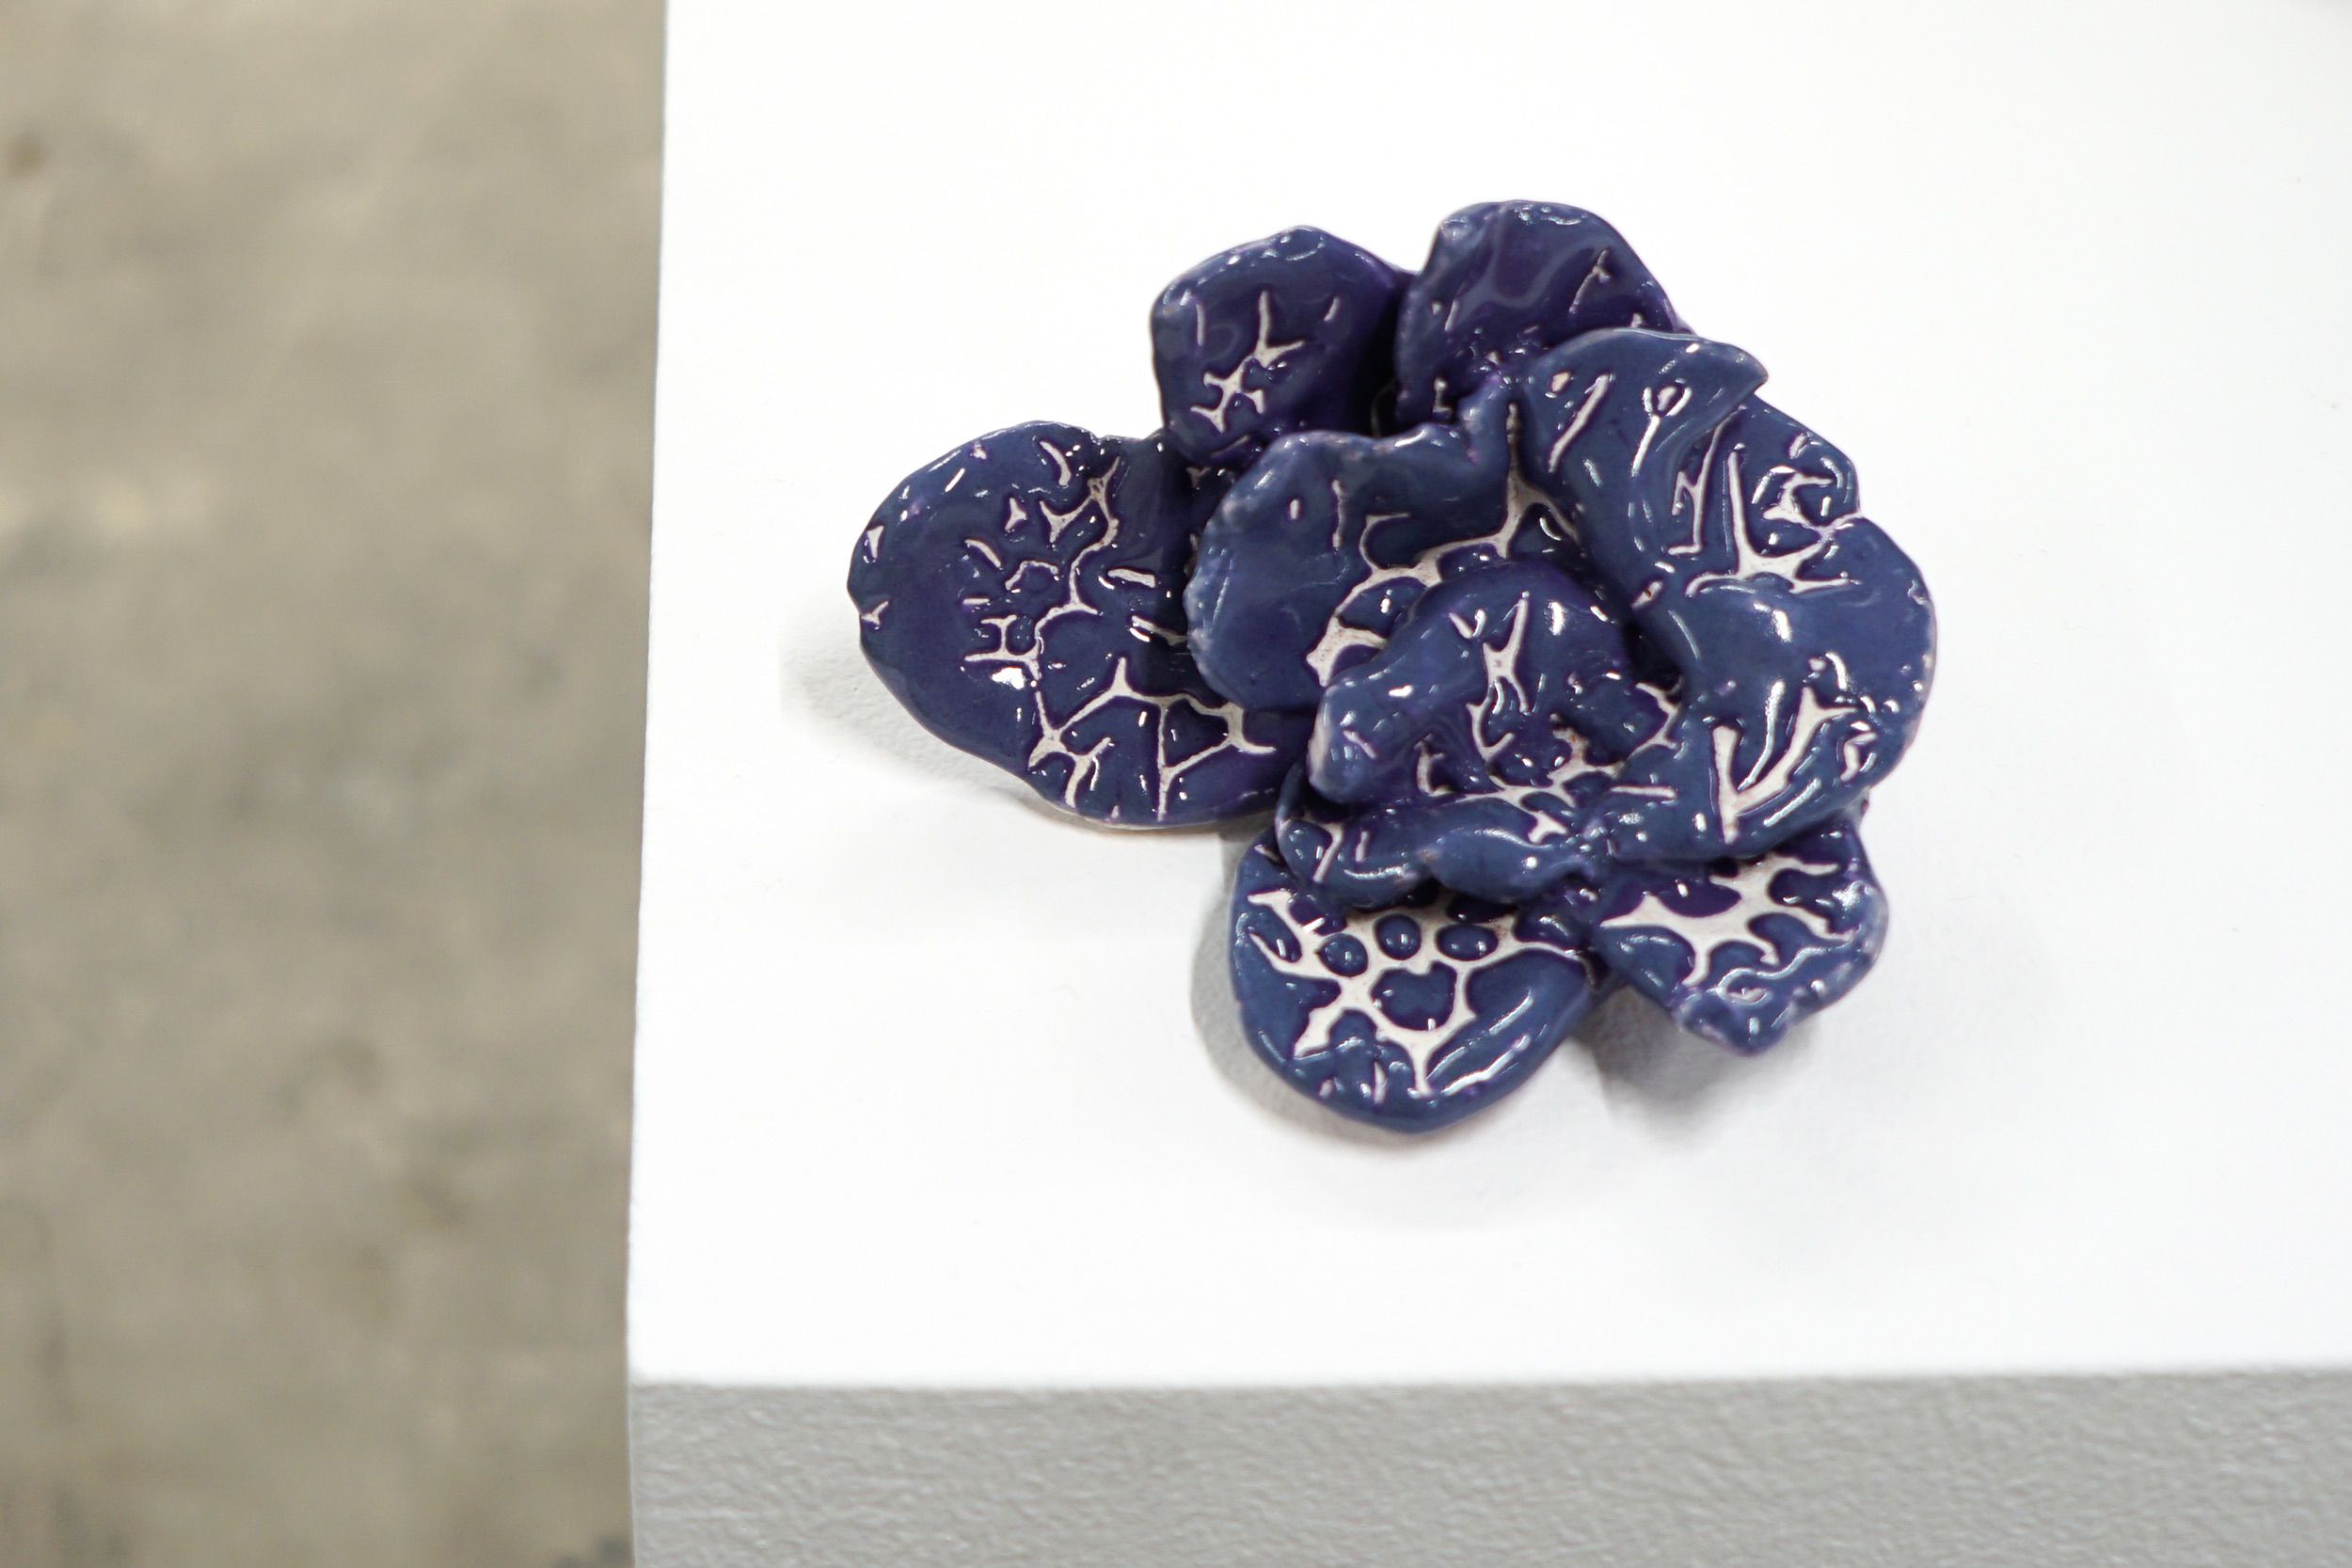  Lee Maida  Wet Orchid , 2016 Glazed ceramic 2.5 x 4.5 x 4.5 inches 